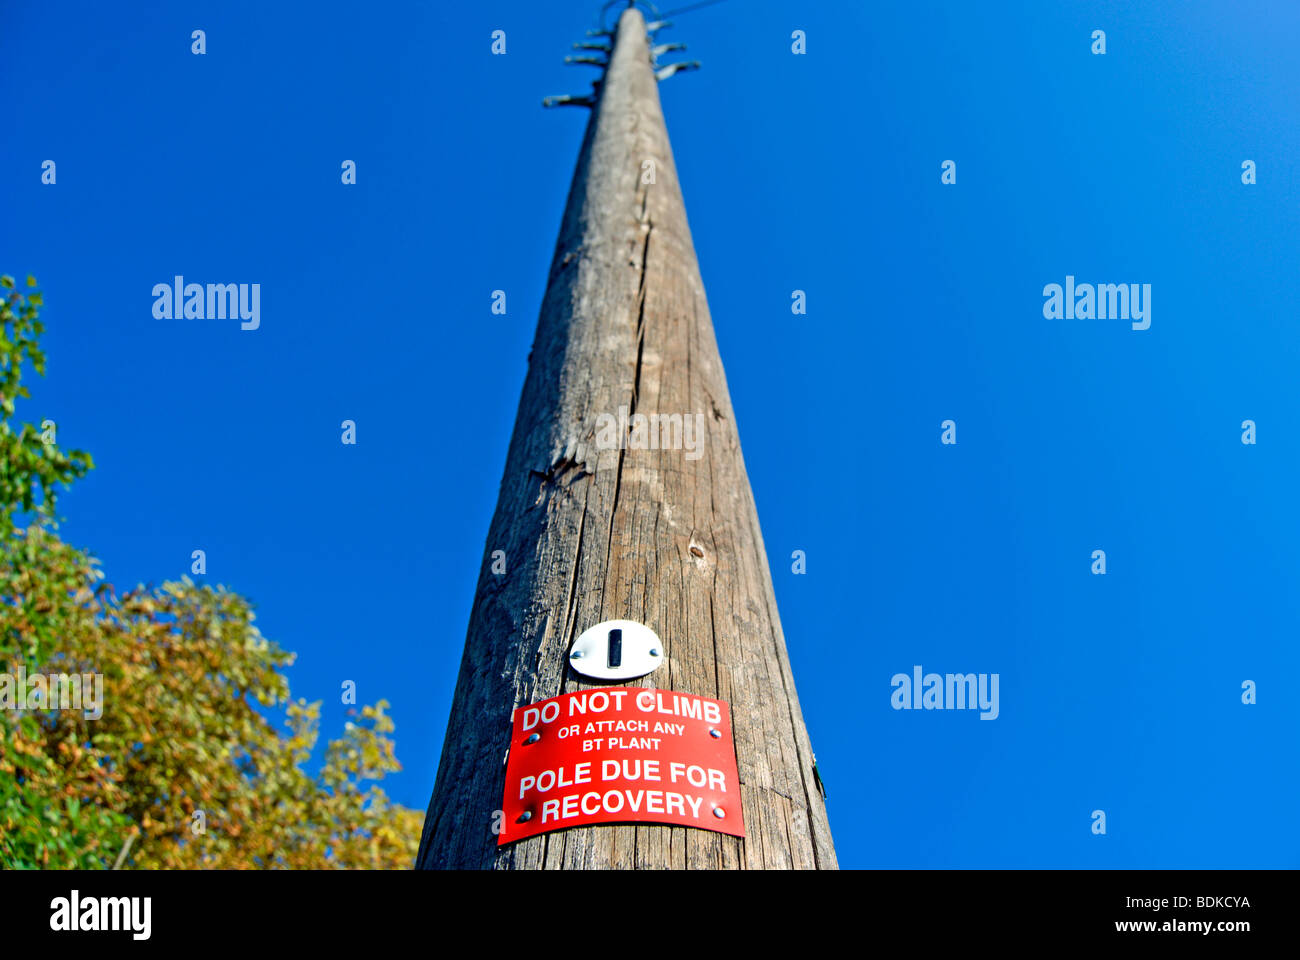 british wooden telegraph pole with do not climb sign and pole due for recovery notice Stock Photo